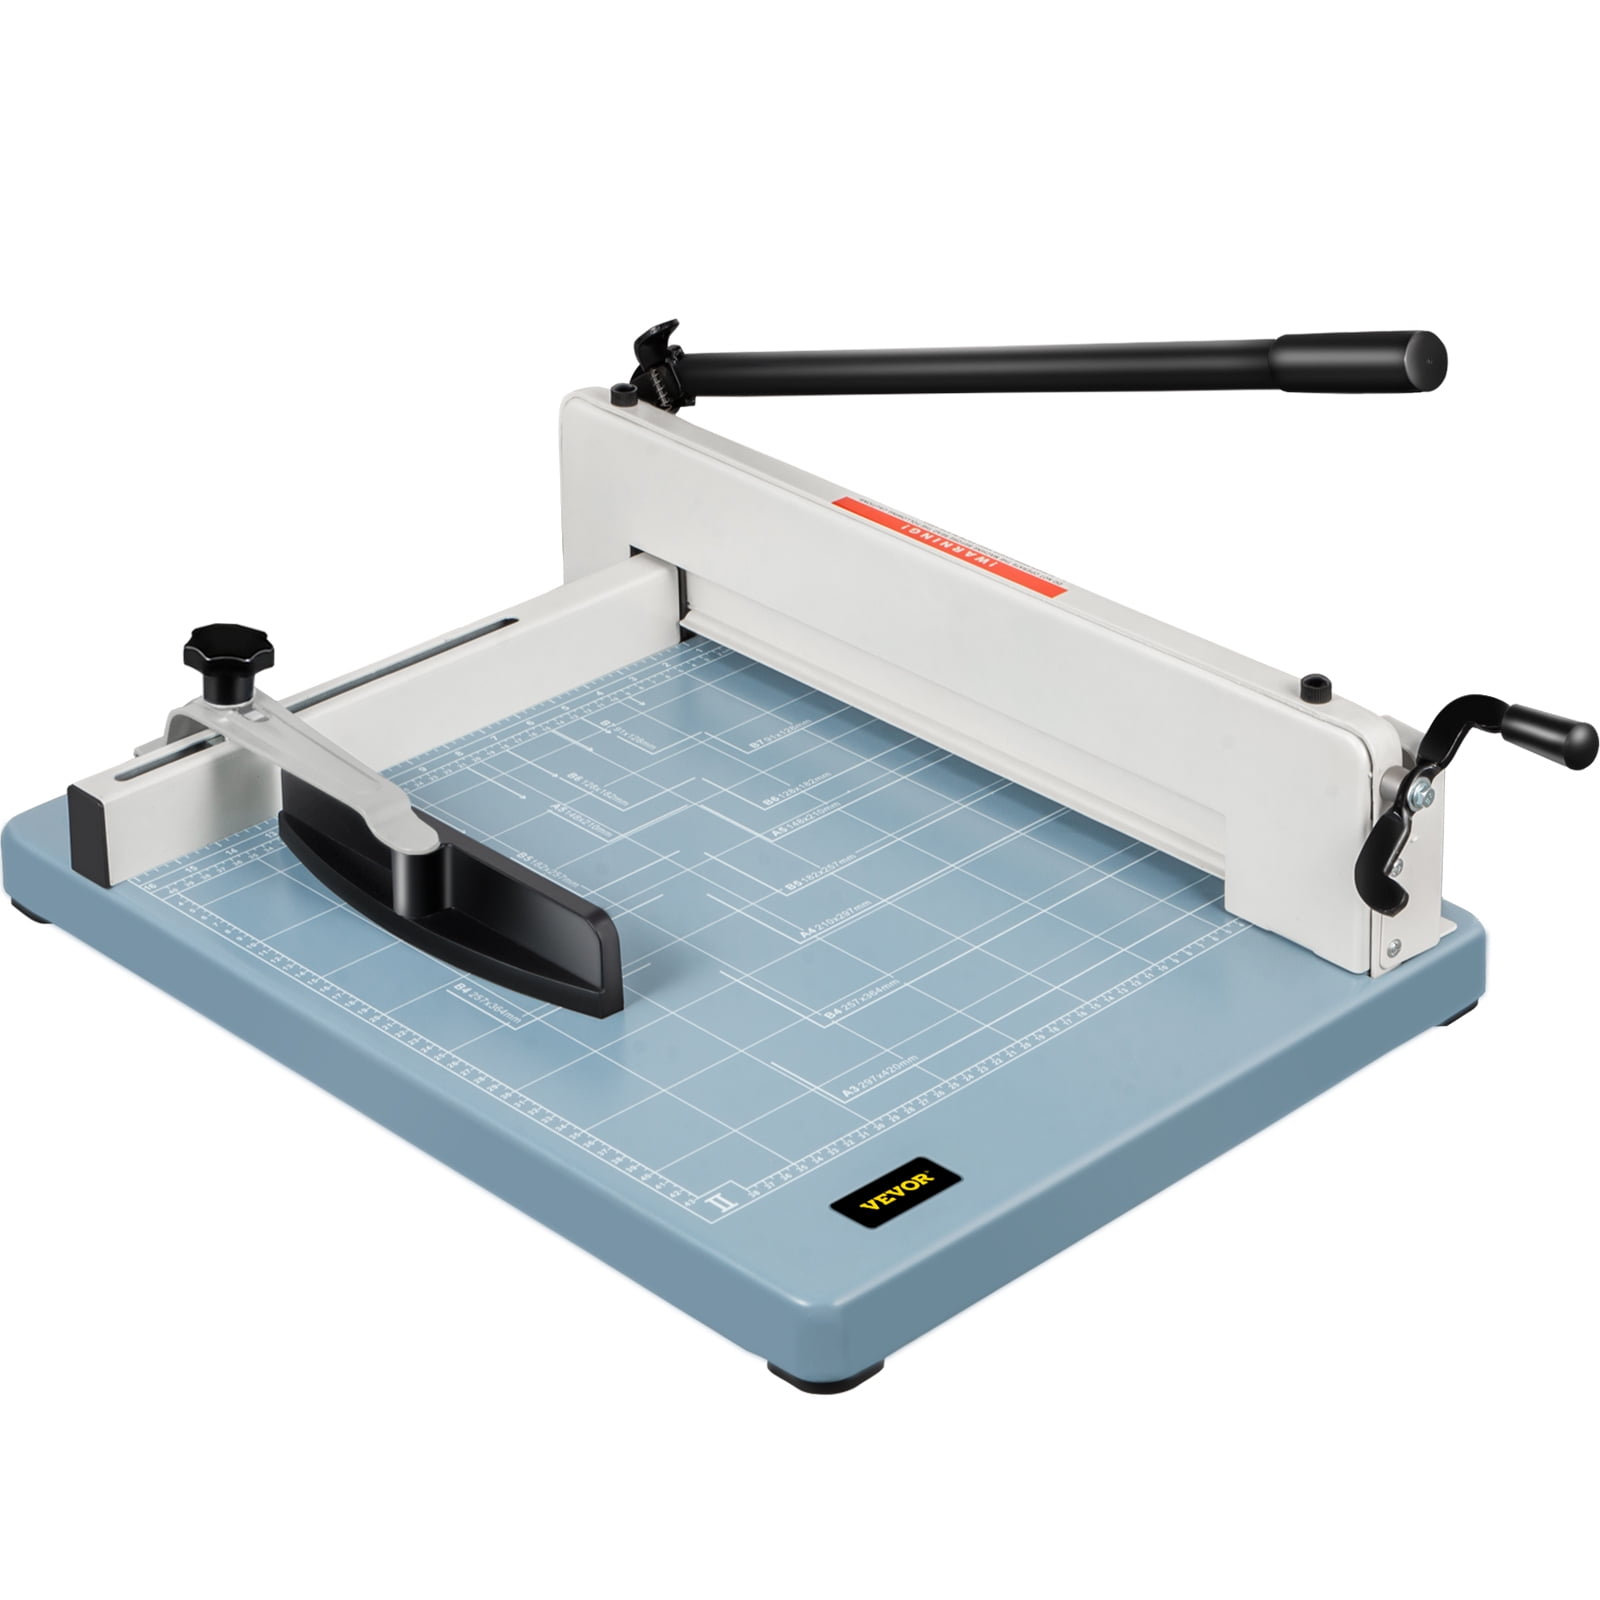 Details about   A4-A6 Paper Cutter Guillotine Page Trimmer 40 Sheets Heavy Duty Cutting Machine 